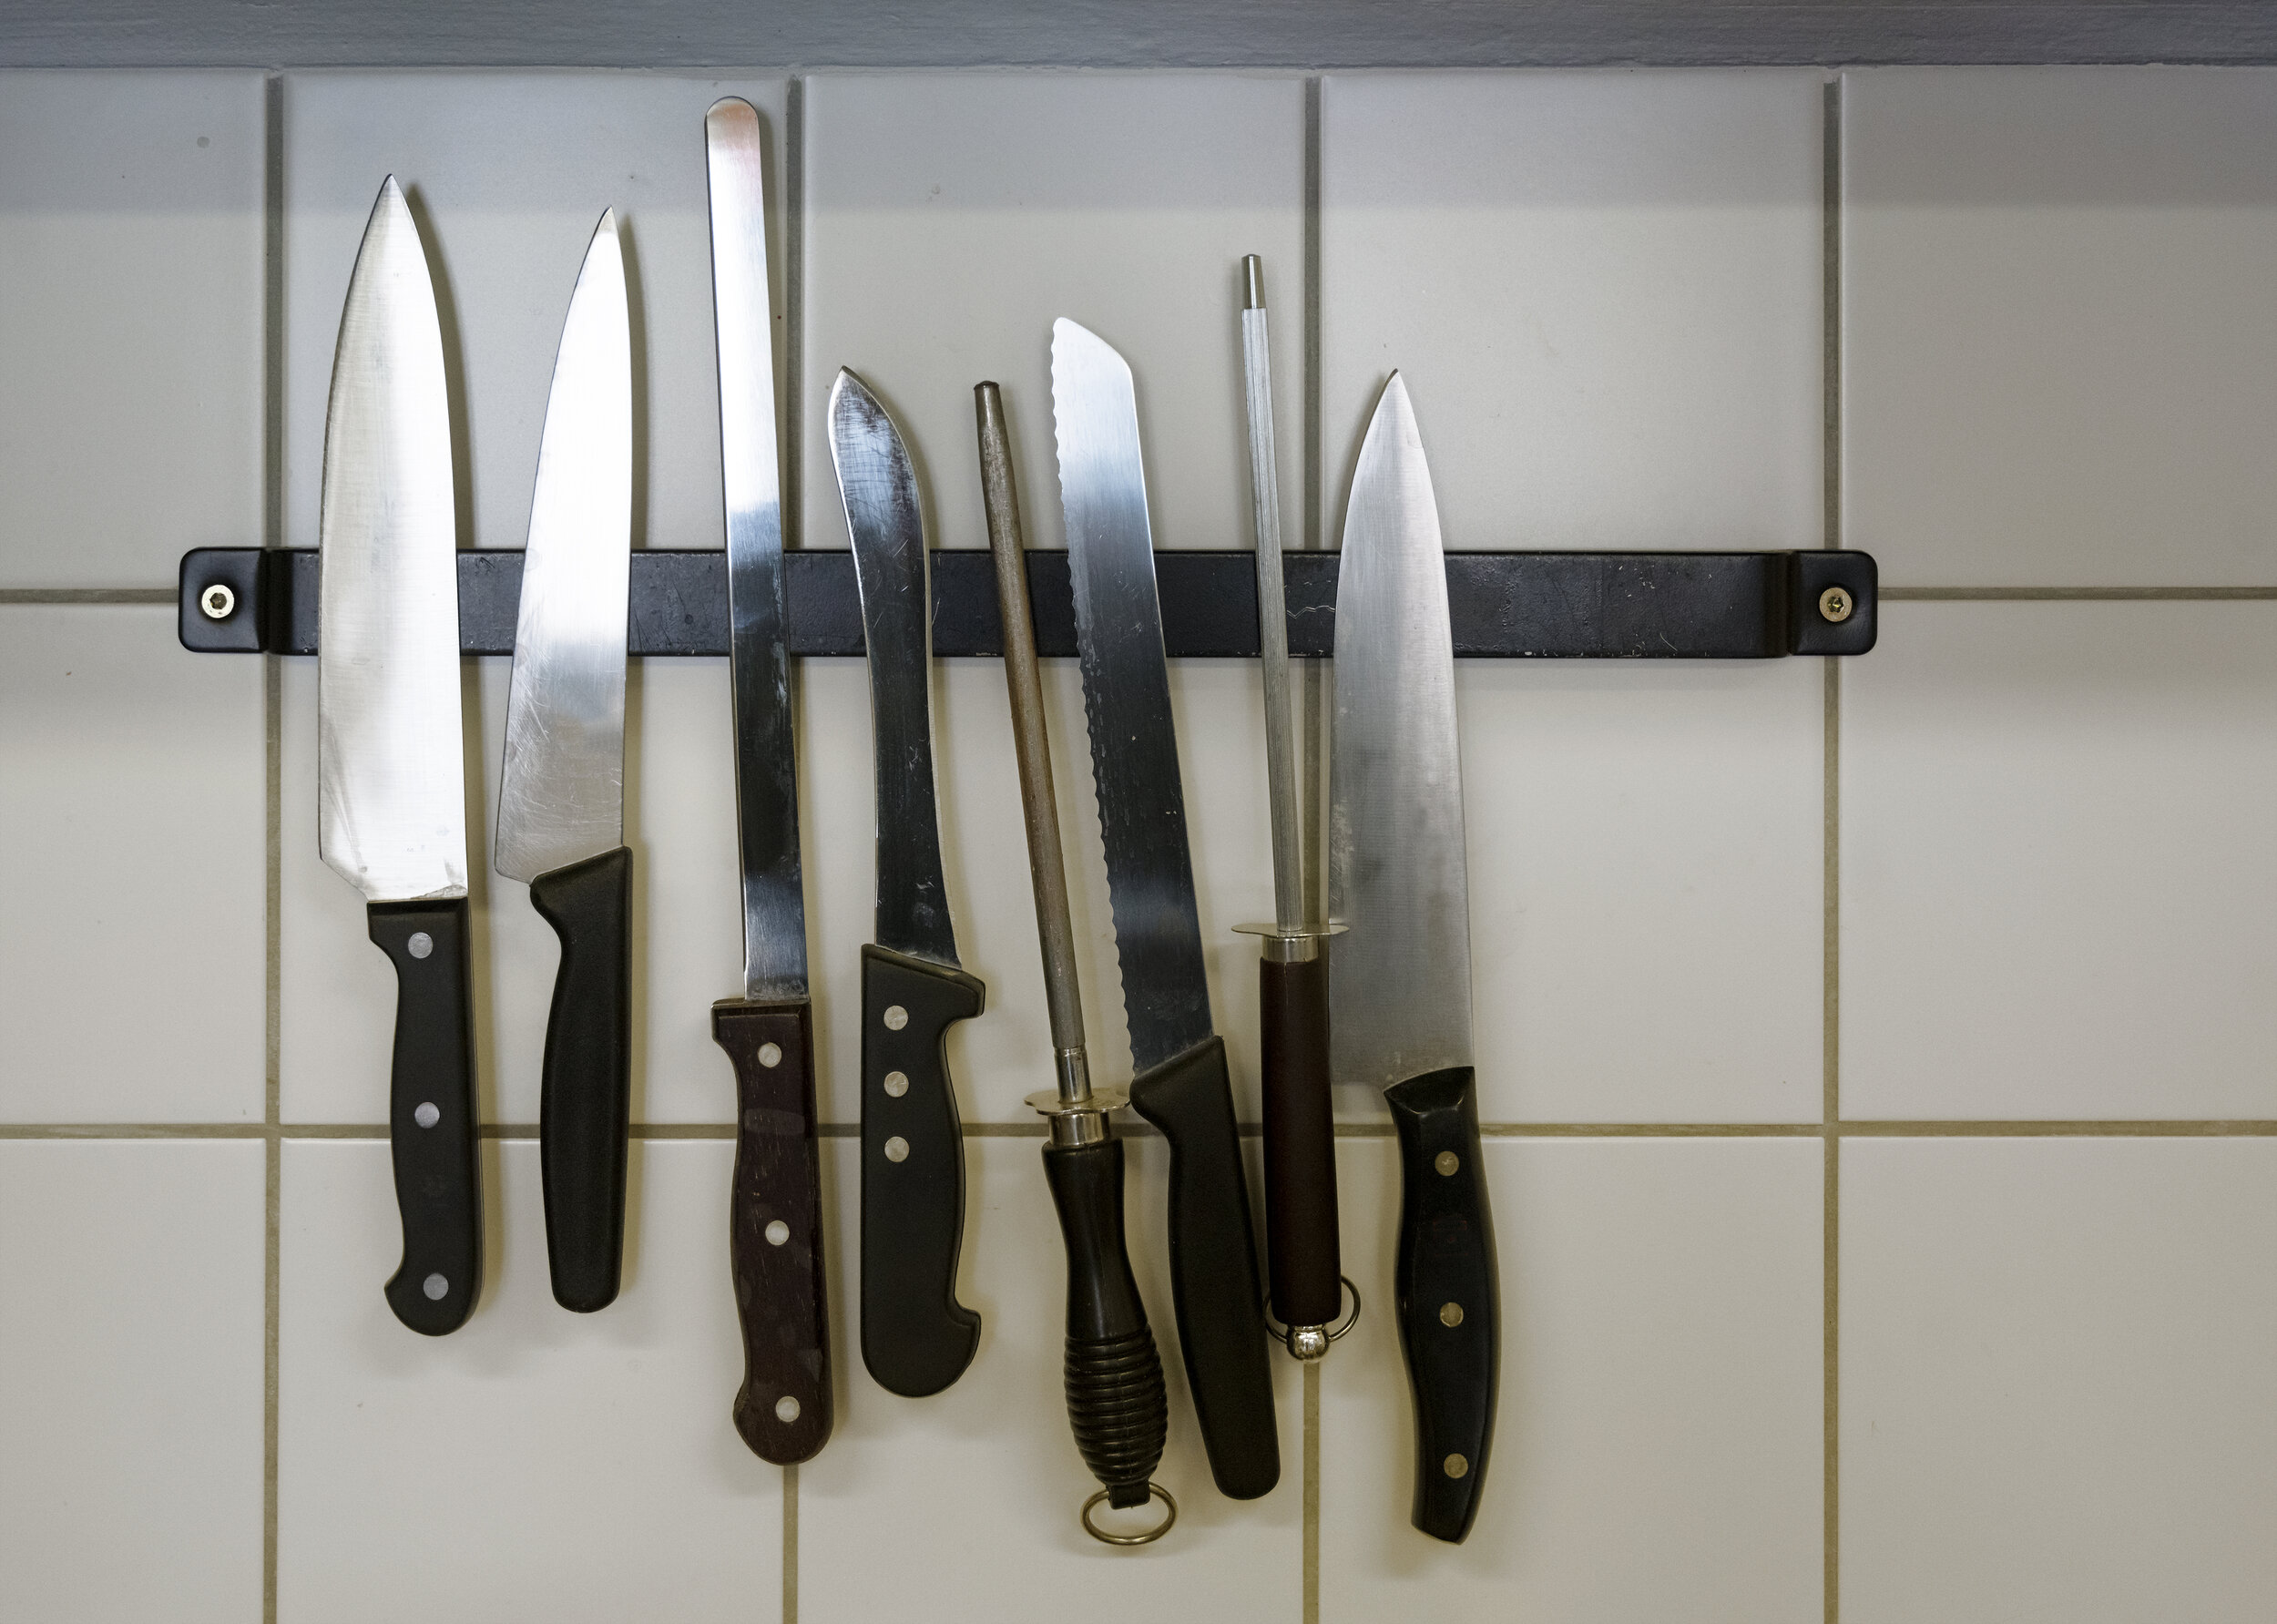 large-kitchen-knives-and-honing-steels-hanging-on-a-magnetic-holder-on-the-tiled-wall,-copy-space-1150455766_4500x3209.jpeg